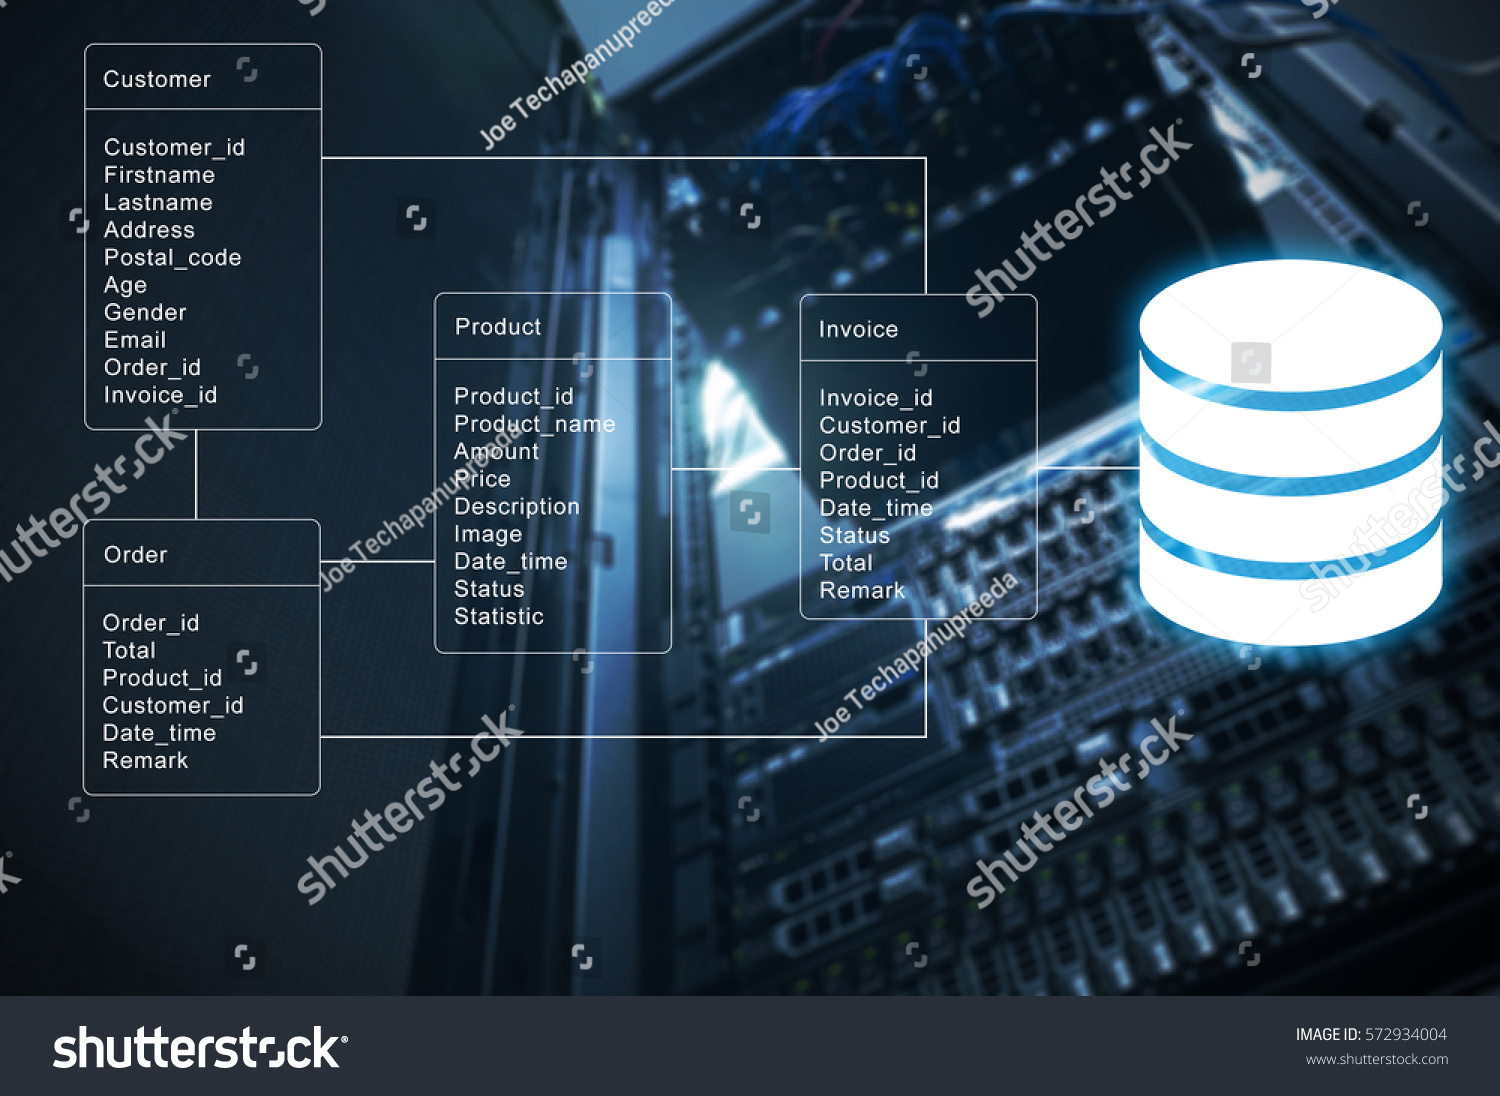 stock-photo-database-table-with-server-storage-and-network-in-datacenter-background-572934004.jpg